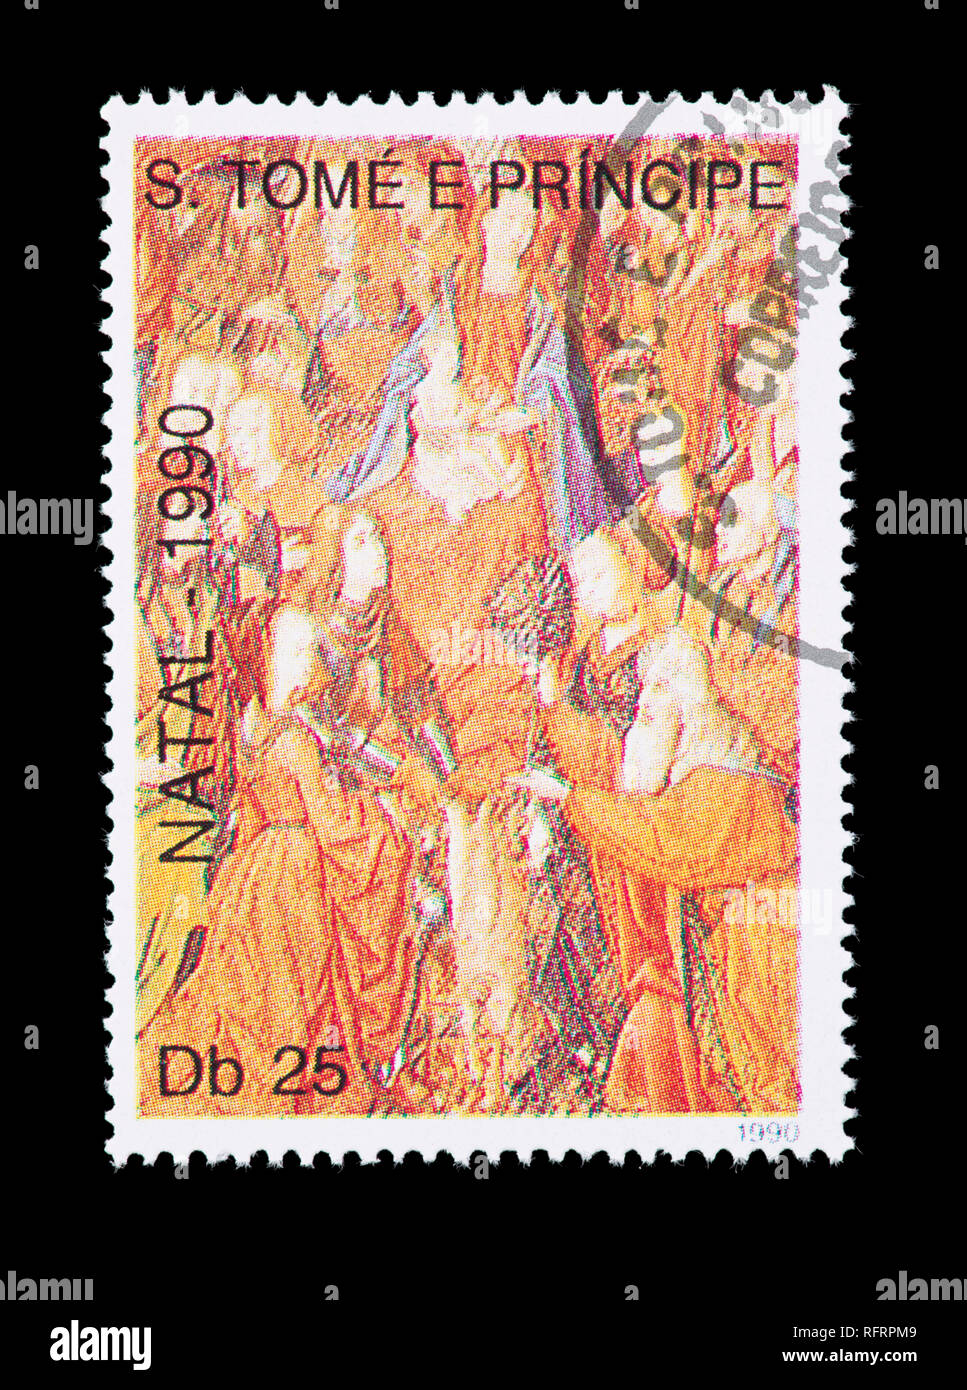 Postage stamp from Saint Thomas and Prince Islands depicting a nativity scene. Stock Photo